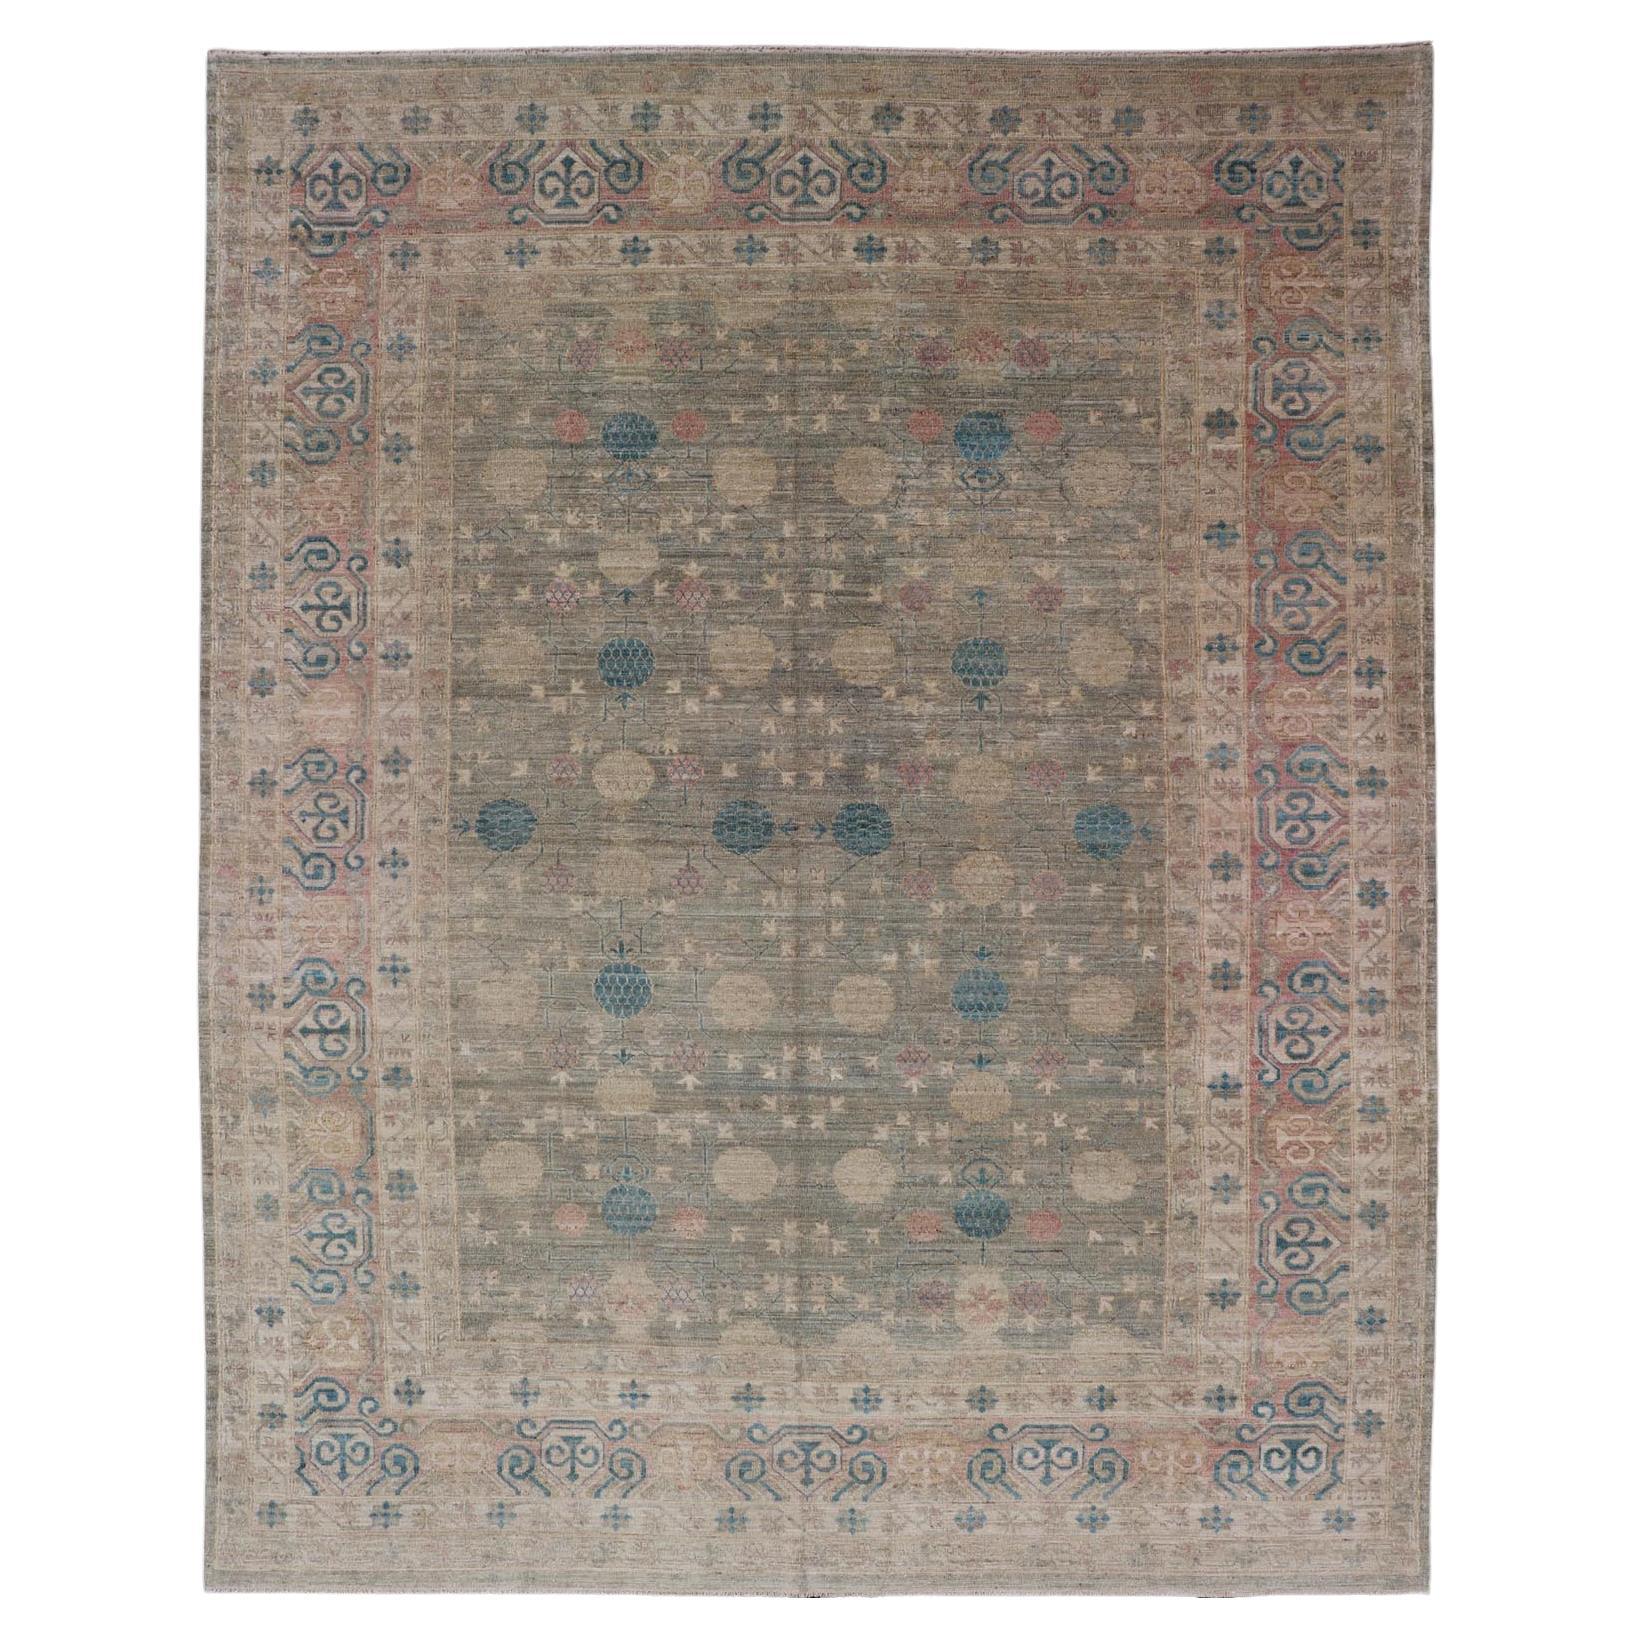 Large Modern Tribal Khotan Rug in Shades of Cream, Green, Blue, and Coral For Sale